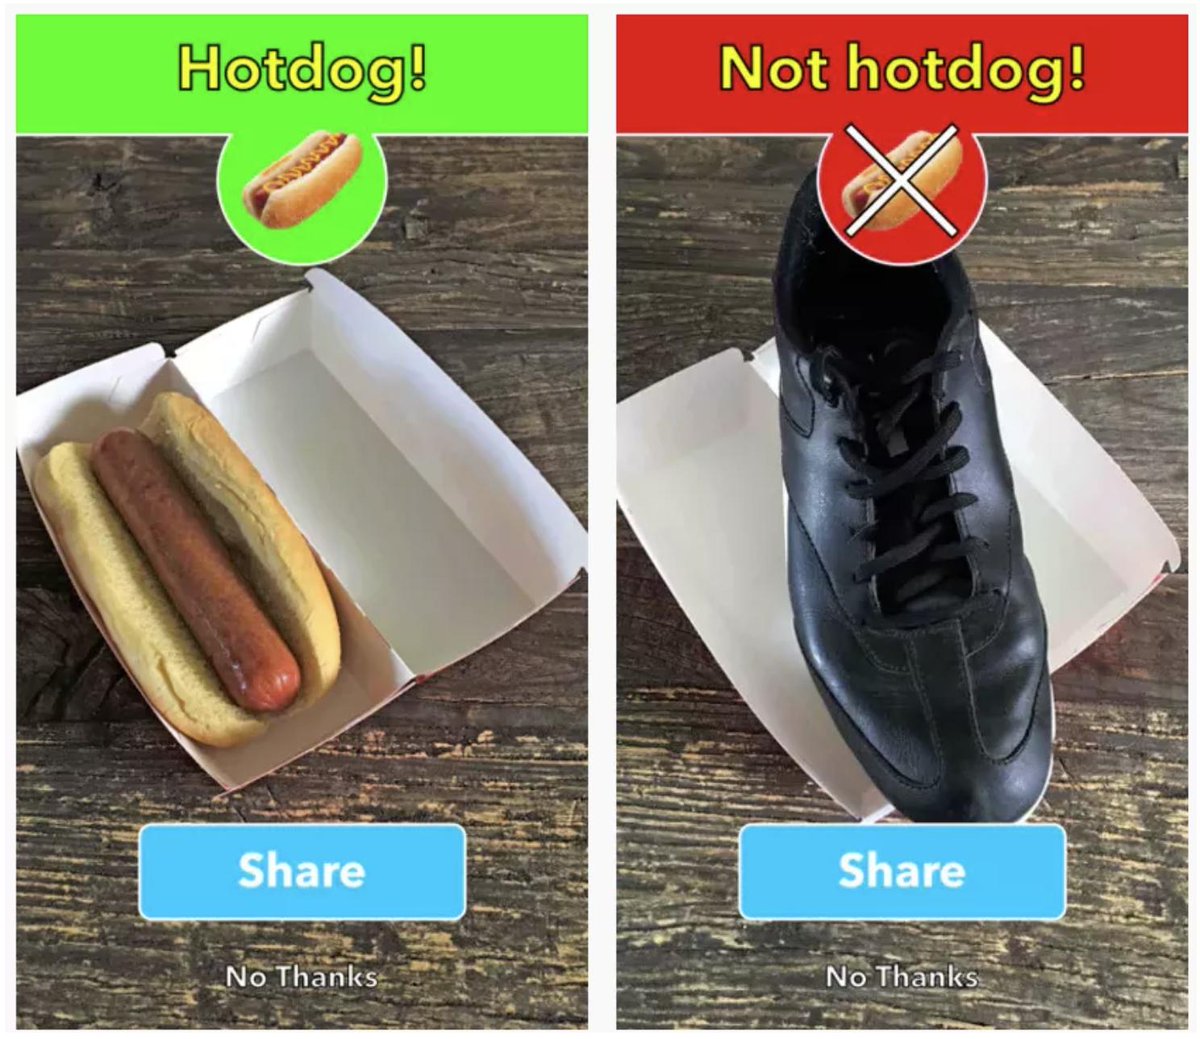  #delightful_design_details 7Something can be delightful while not being useful nor effective.For example, the "Not Hotdog" app or the Hotdog phone case. They might actually be profitable and adored. It might even be a great product for those who find value in its delight.